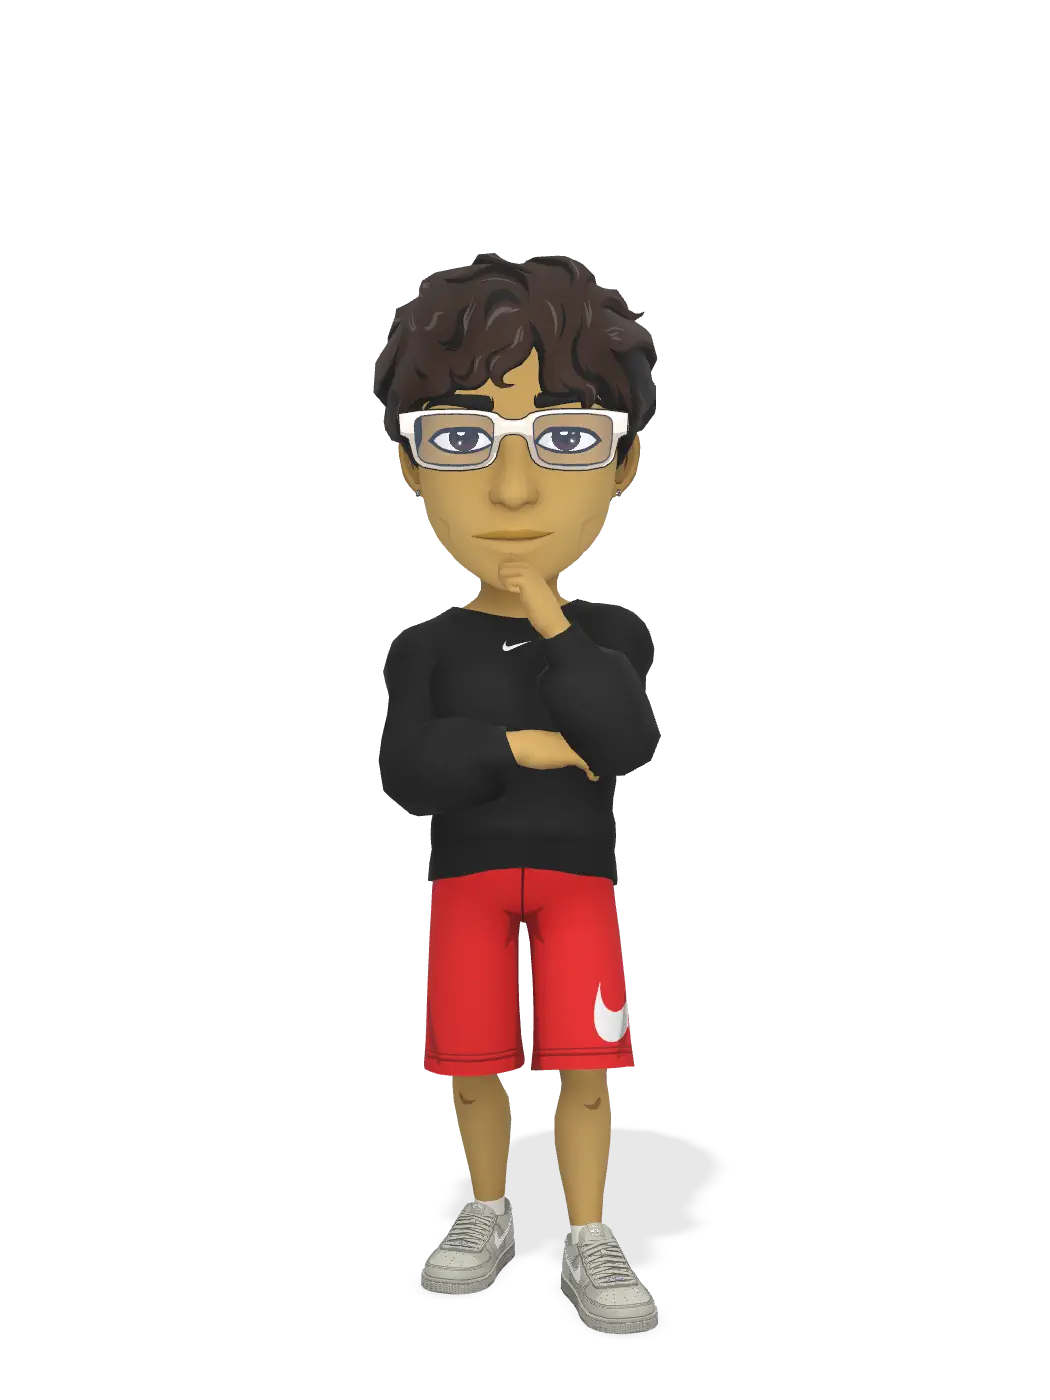 3D Bitmoji for visiontwins